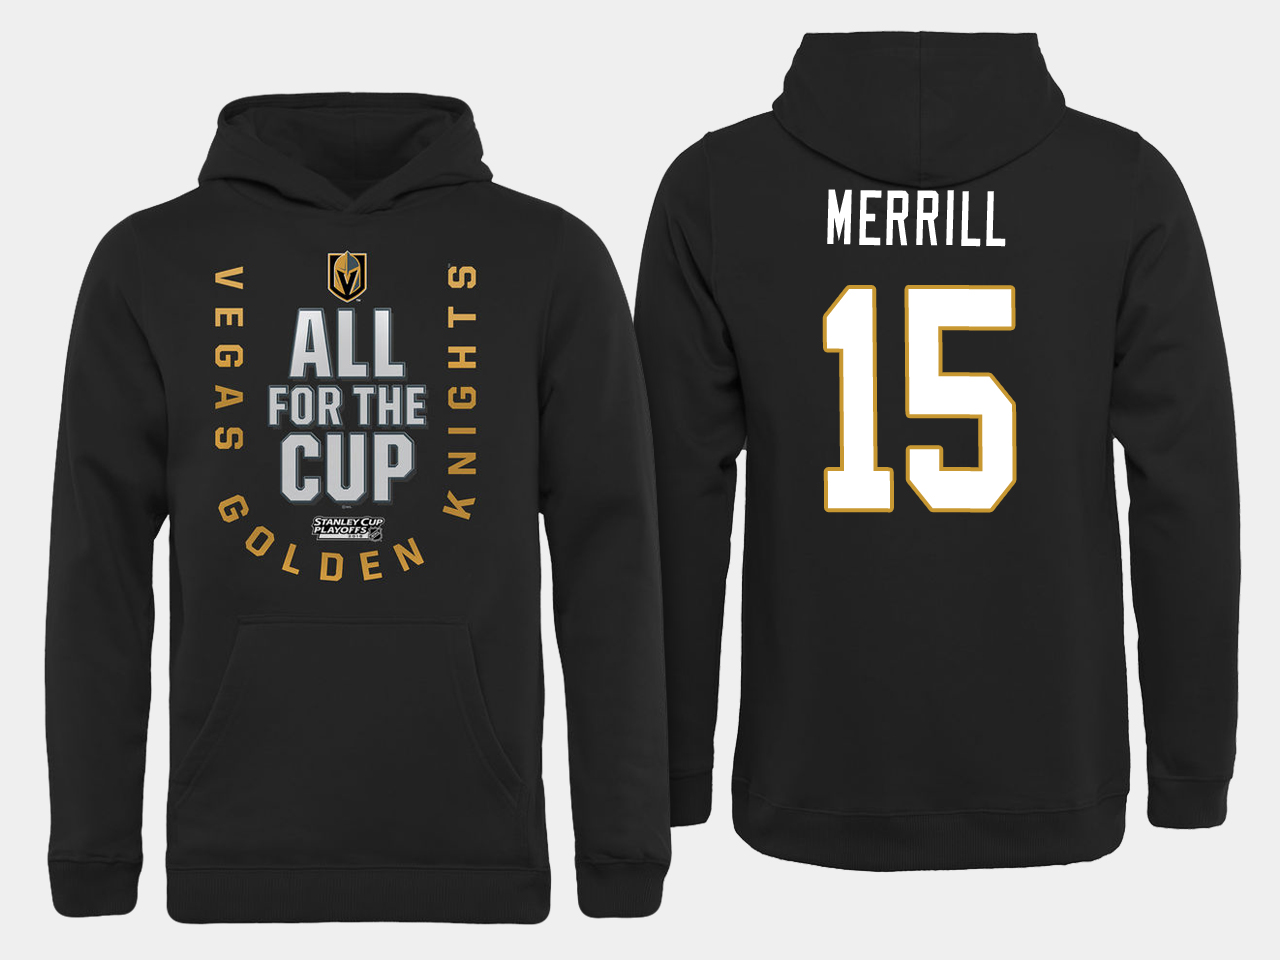 Men NHL Vegas Golden Knights #15 Merrill All for the Cup hoodie->more nhl jerseys->NHL Jersey